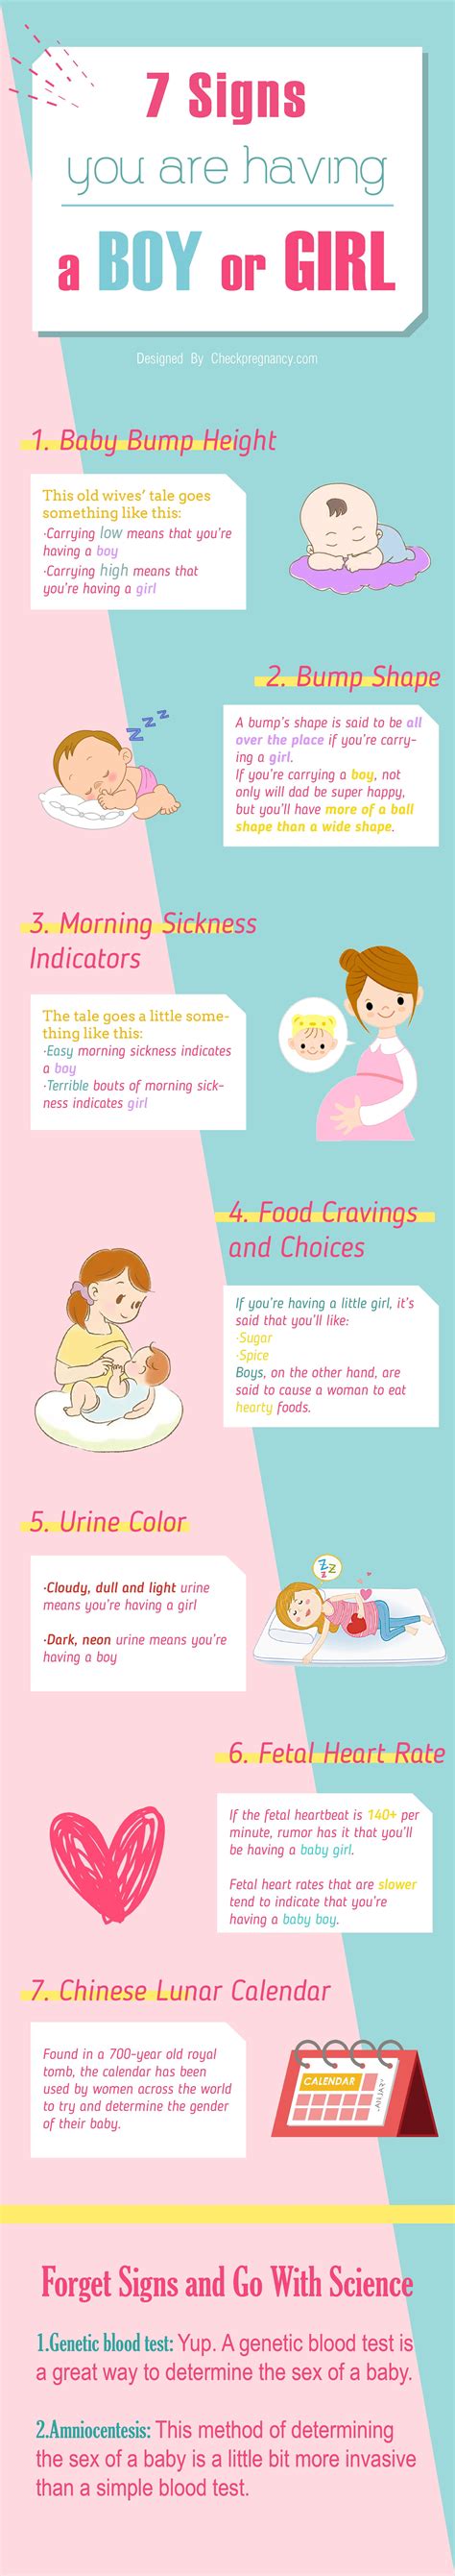 10 Signs Of Having A Baby Boy Signs And Symptoms Of Baby Boy Or Girl